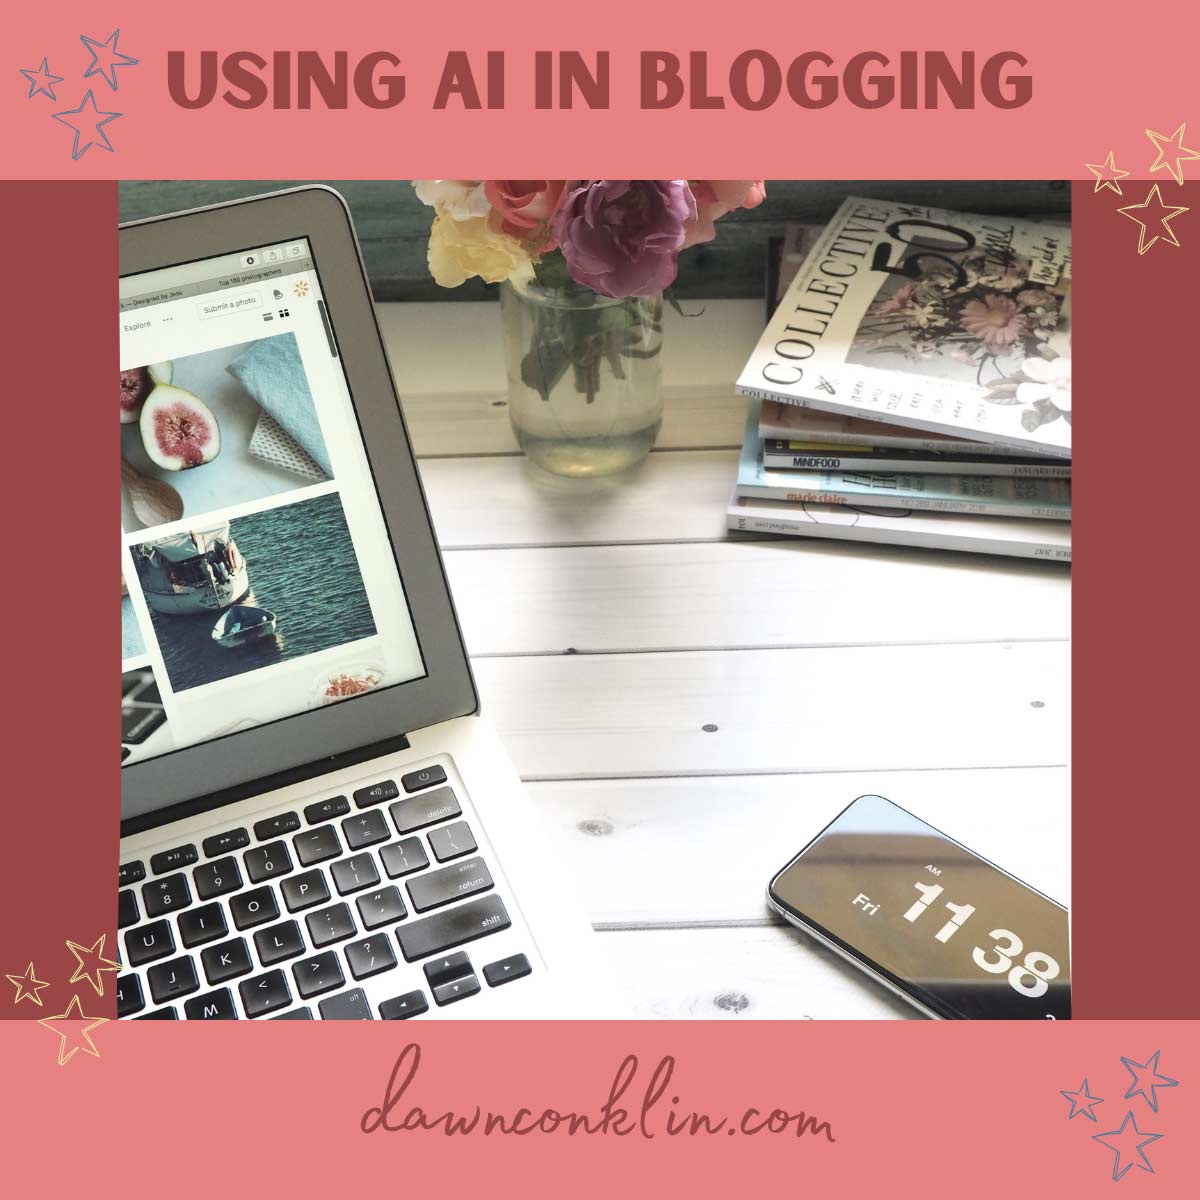 Using AI in blogging. A laptop open on a desktop with a phone and stack of books next to it.